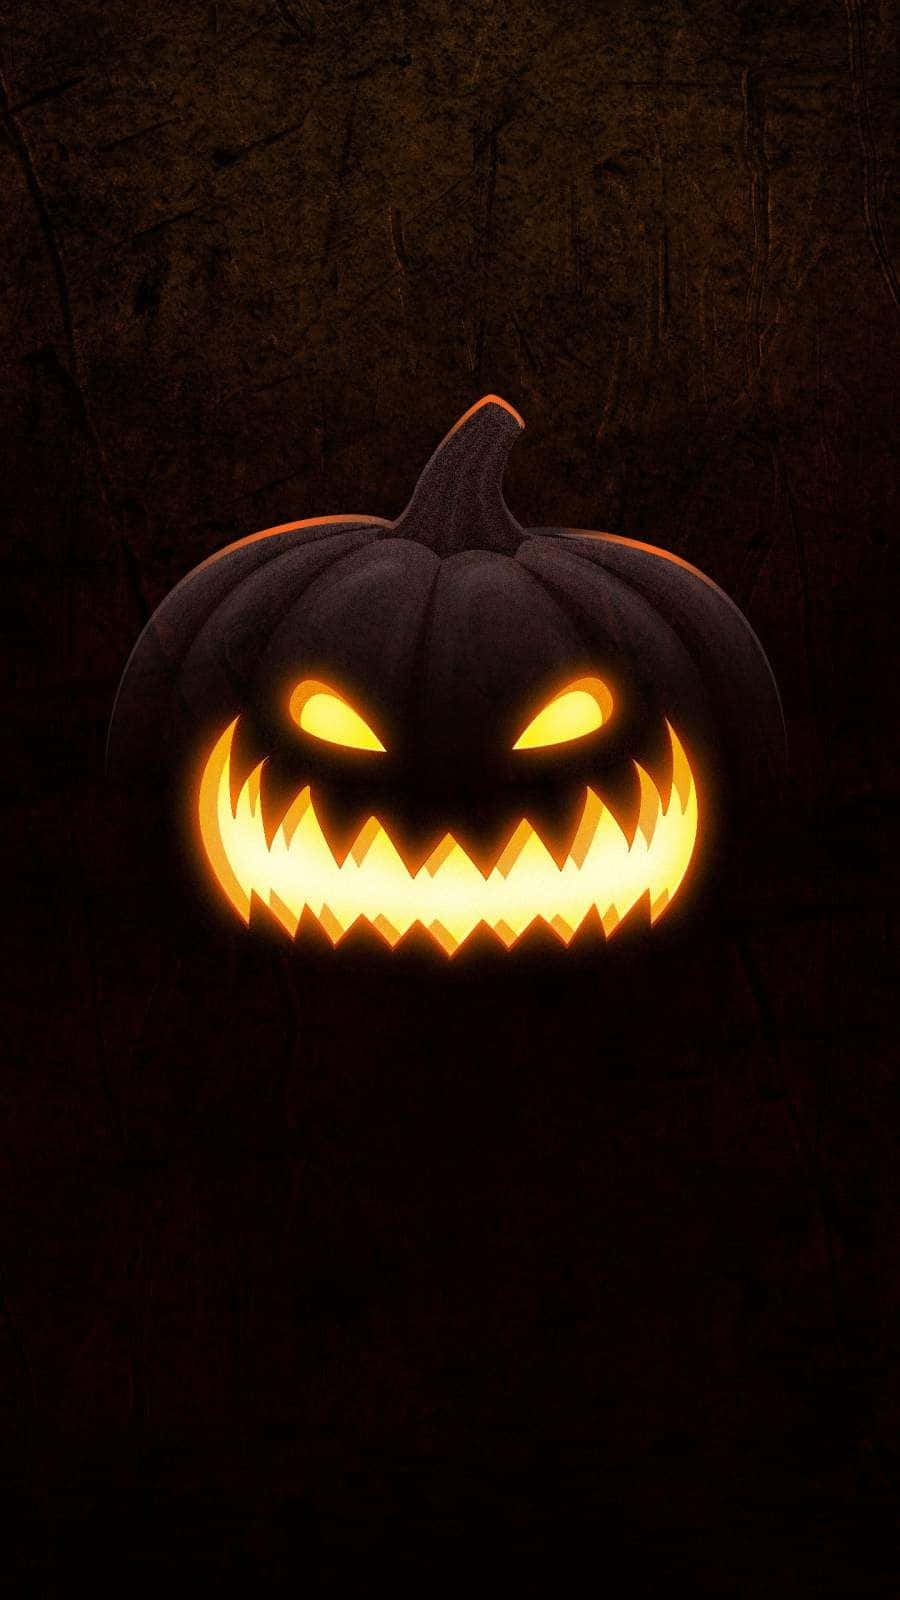 Majestic Carved Pumpkin Glowing in the Night Wallpaper